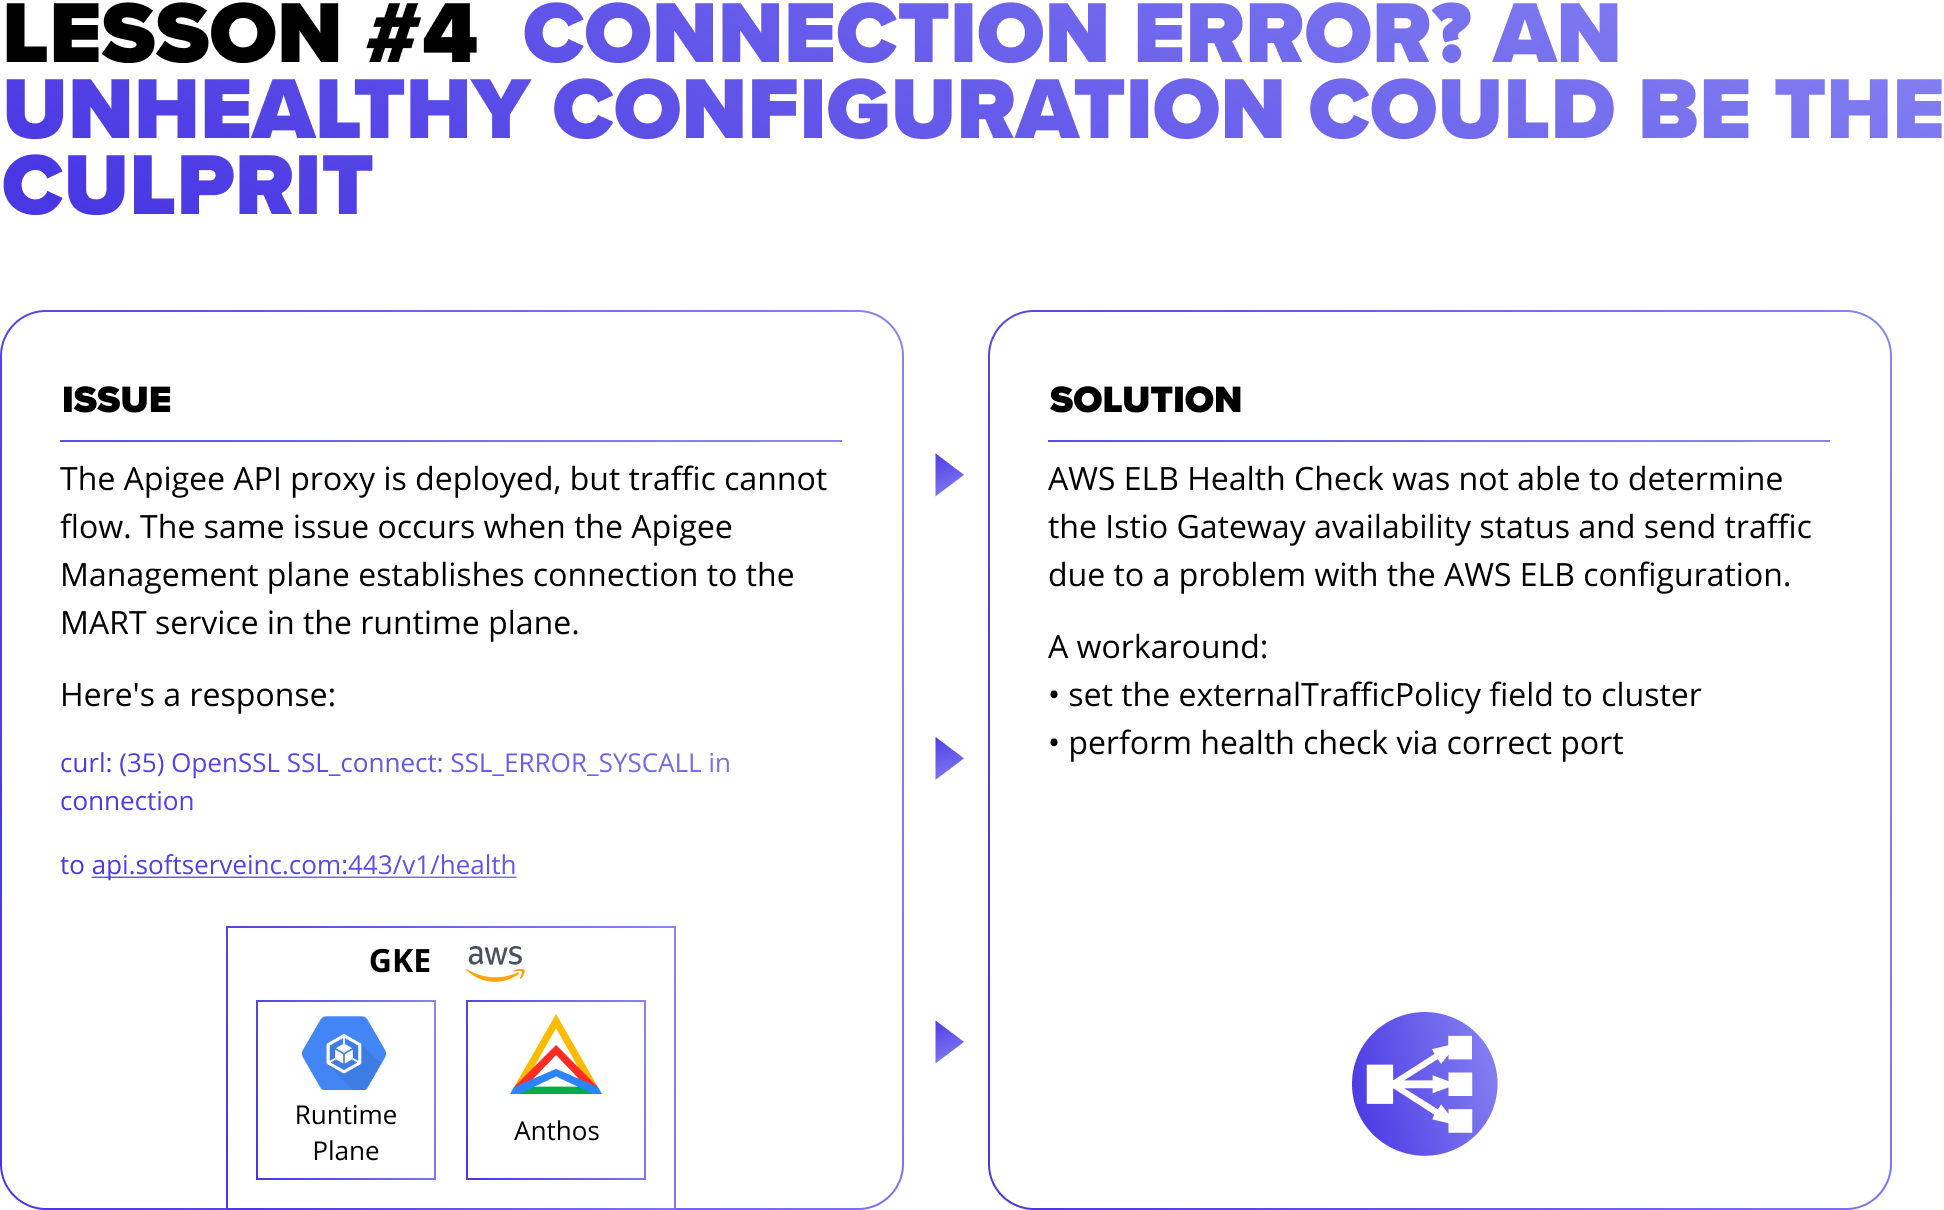 LESSON #4: CONNECTION ERROR? AN UNHEALTHY CONFIGURATION COULD BE THE CULPRIT